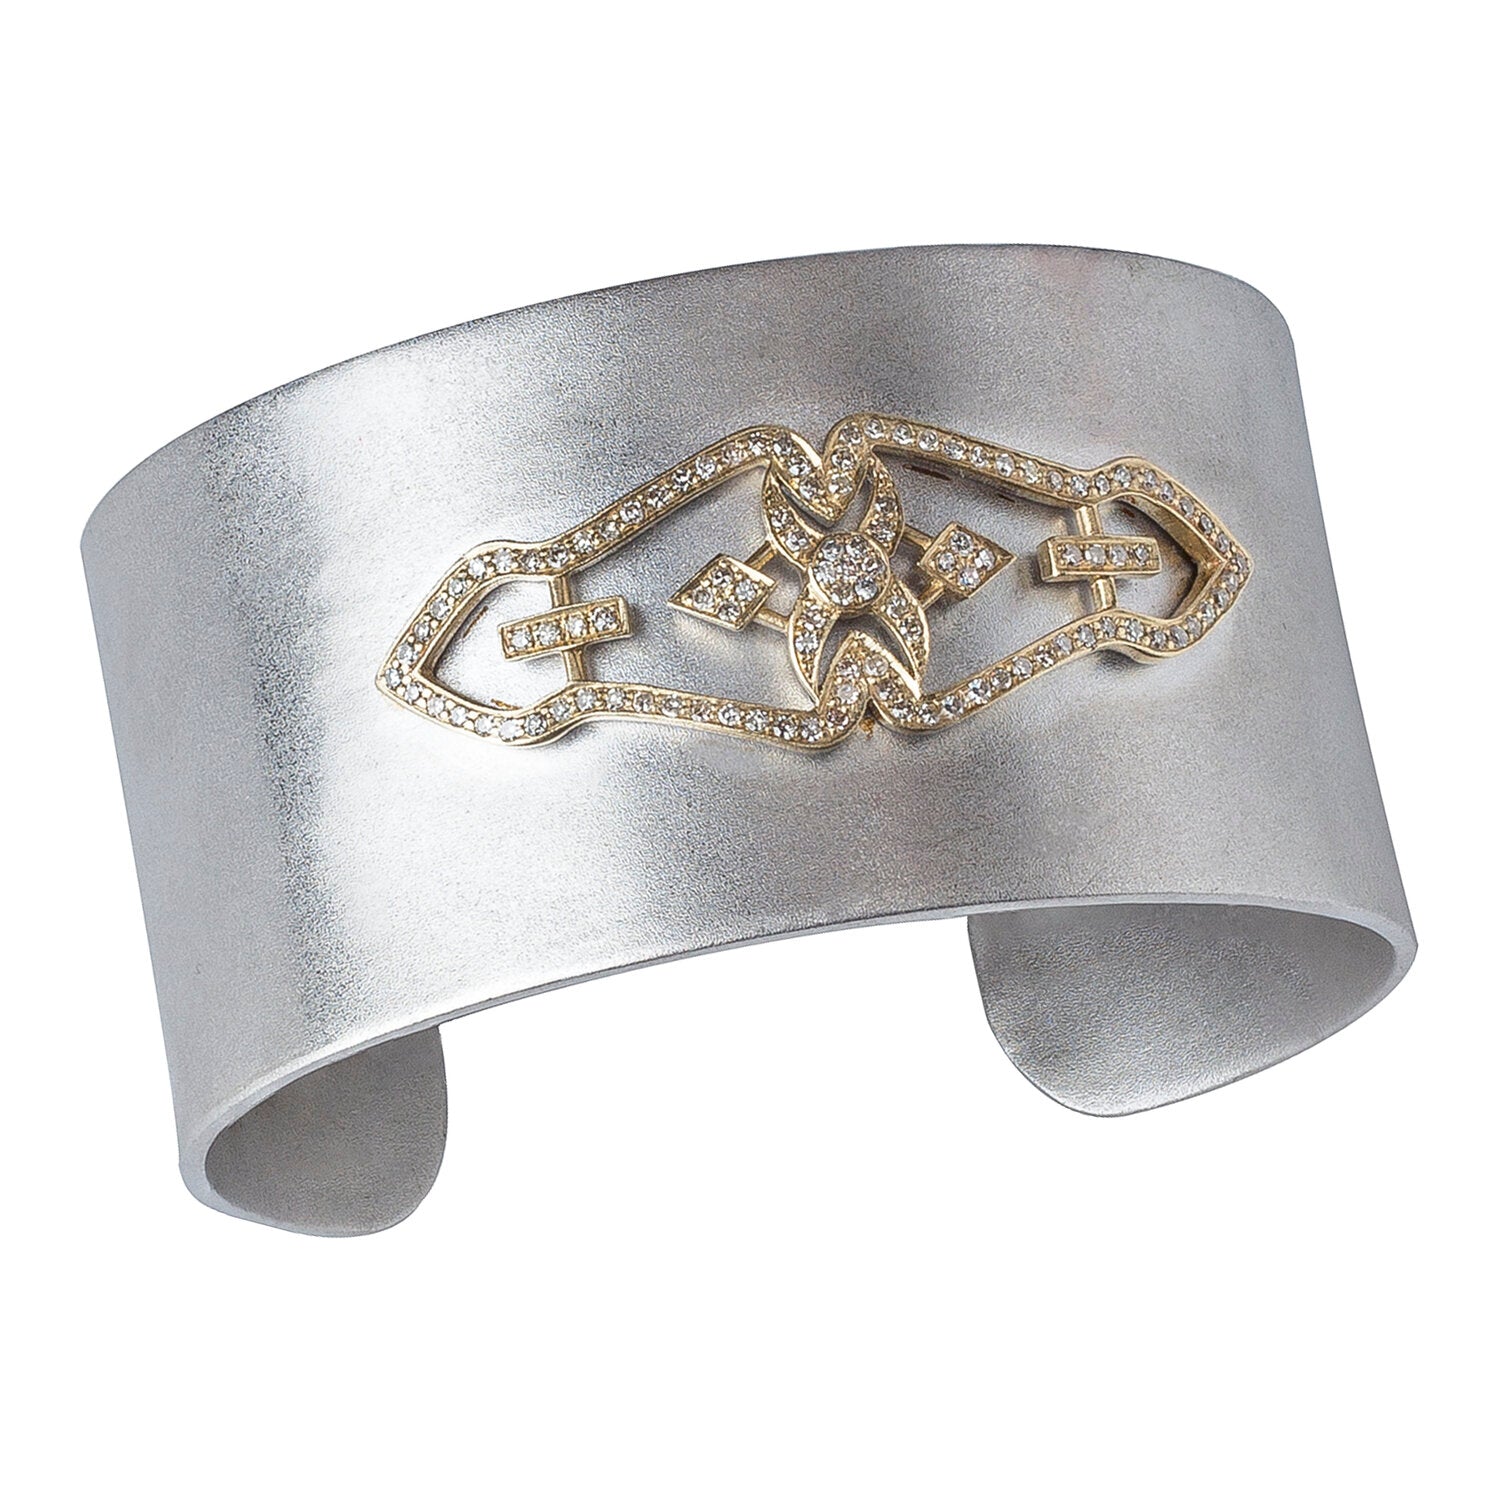 This wide, satin finish, sterling silver cuff bracelet features a vintage shoe clip reproduced in 14 K yellow gold and diamond pavé.  Cuff width: 31 mm  Made in USA